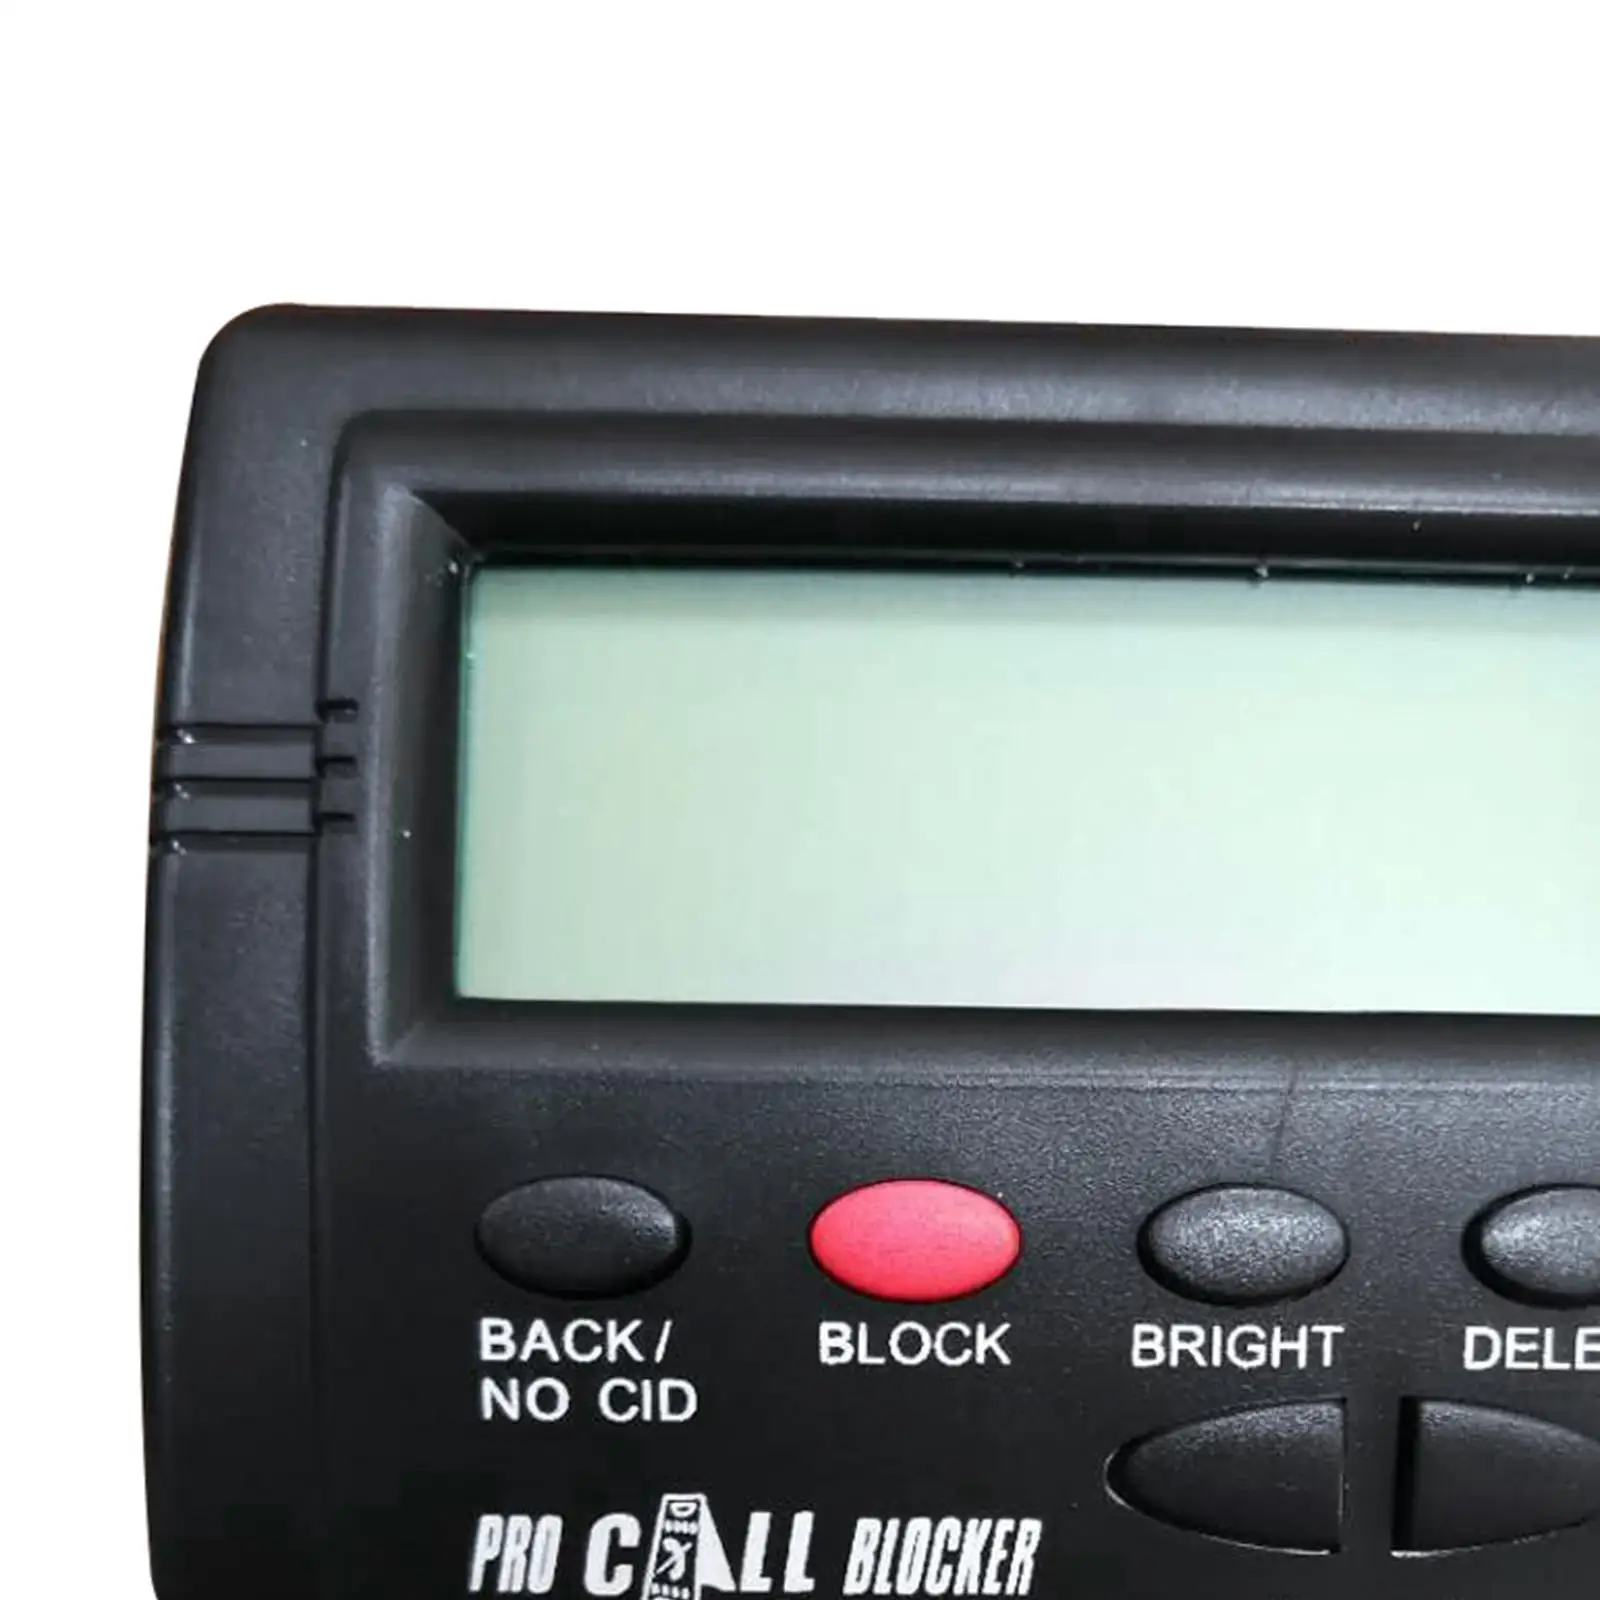 

Pro Incoming Call Telephone with LCD Display 1500 Blacklist Numbers